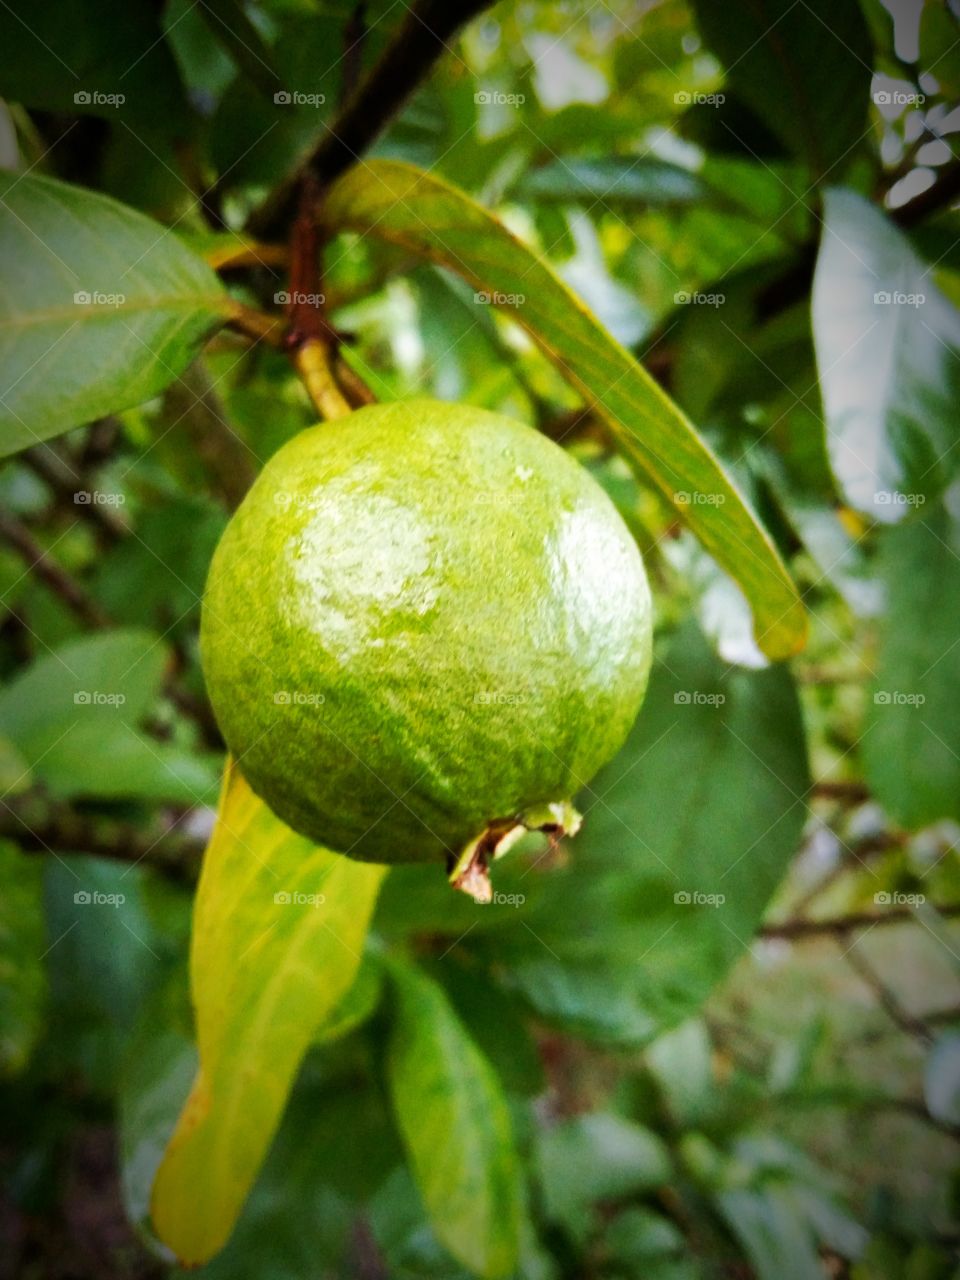 A Very Beautiful Picture Of Guava Fruits.